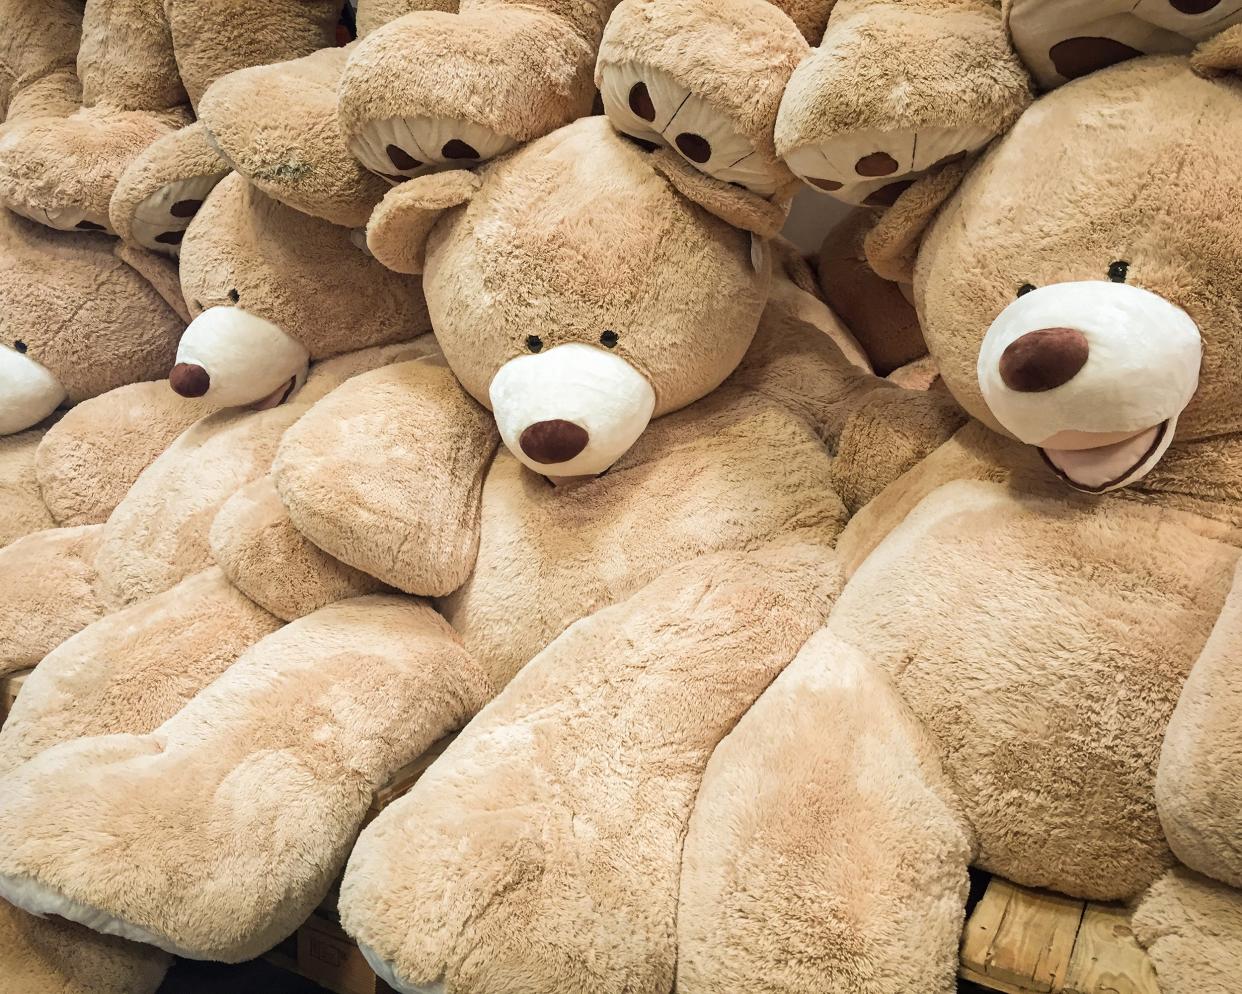 gigantic plush bears on display for sale at Costco